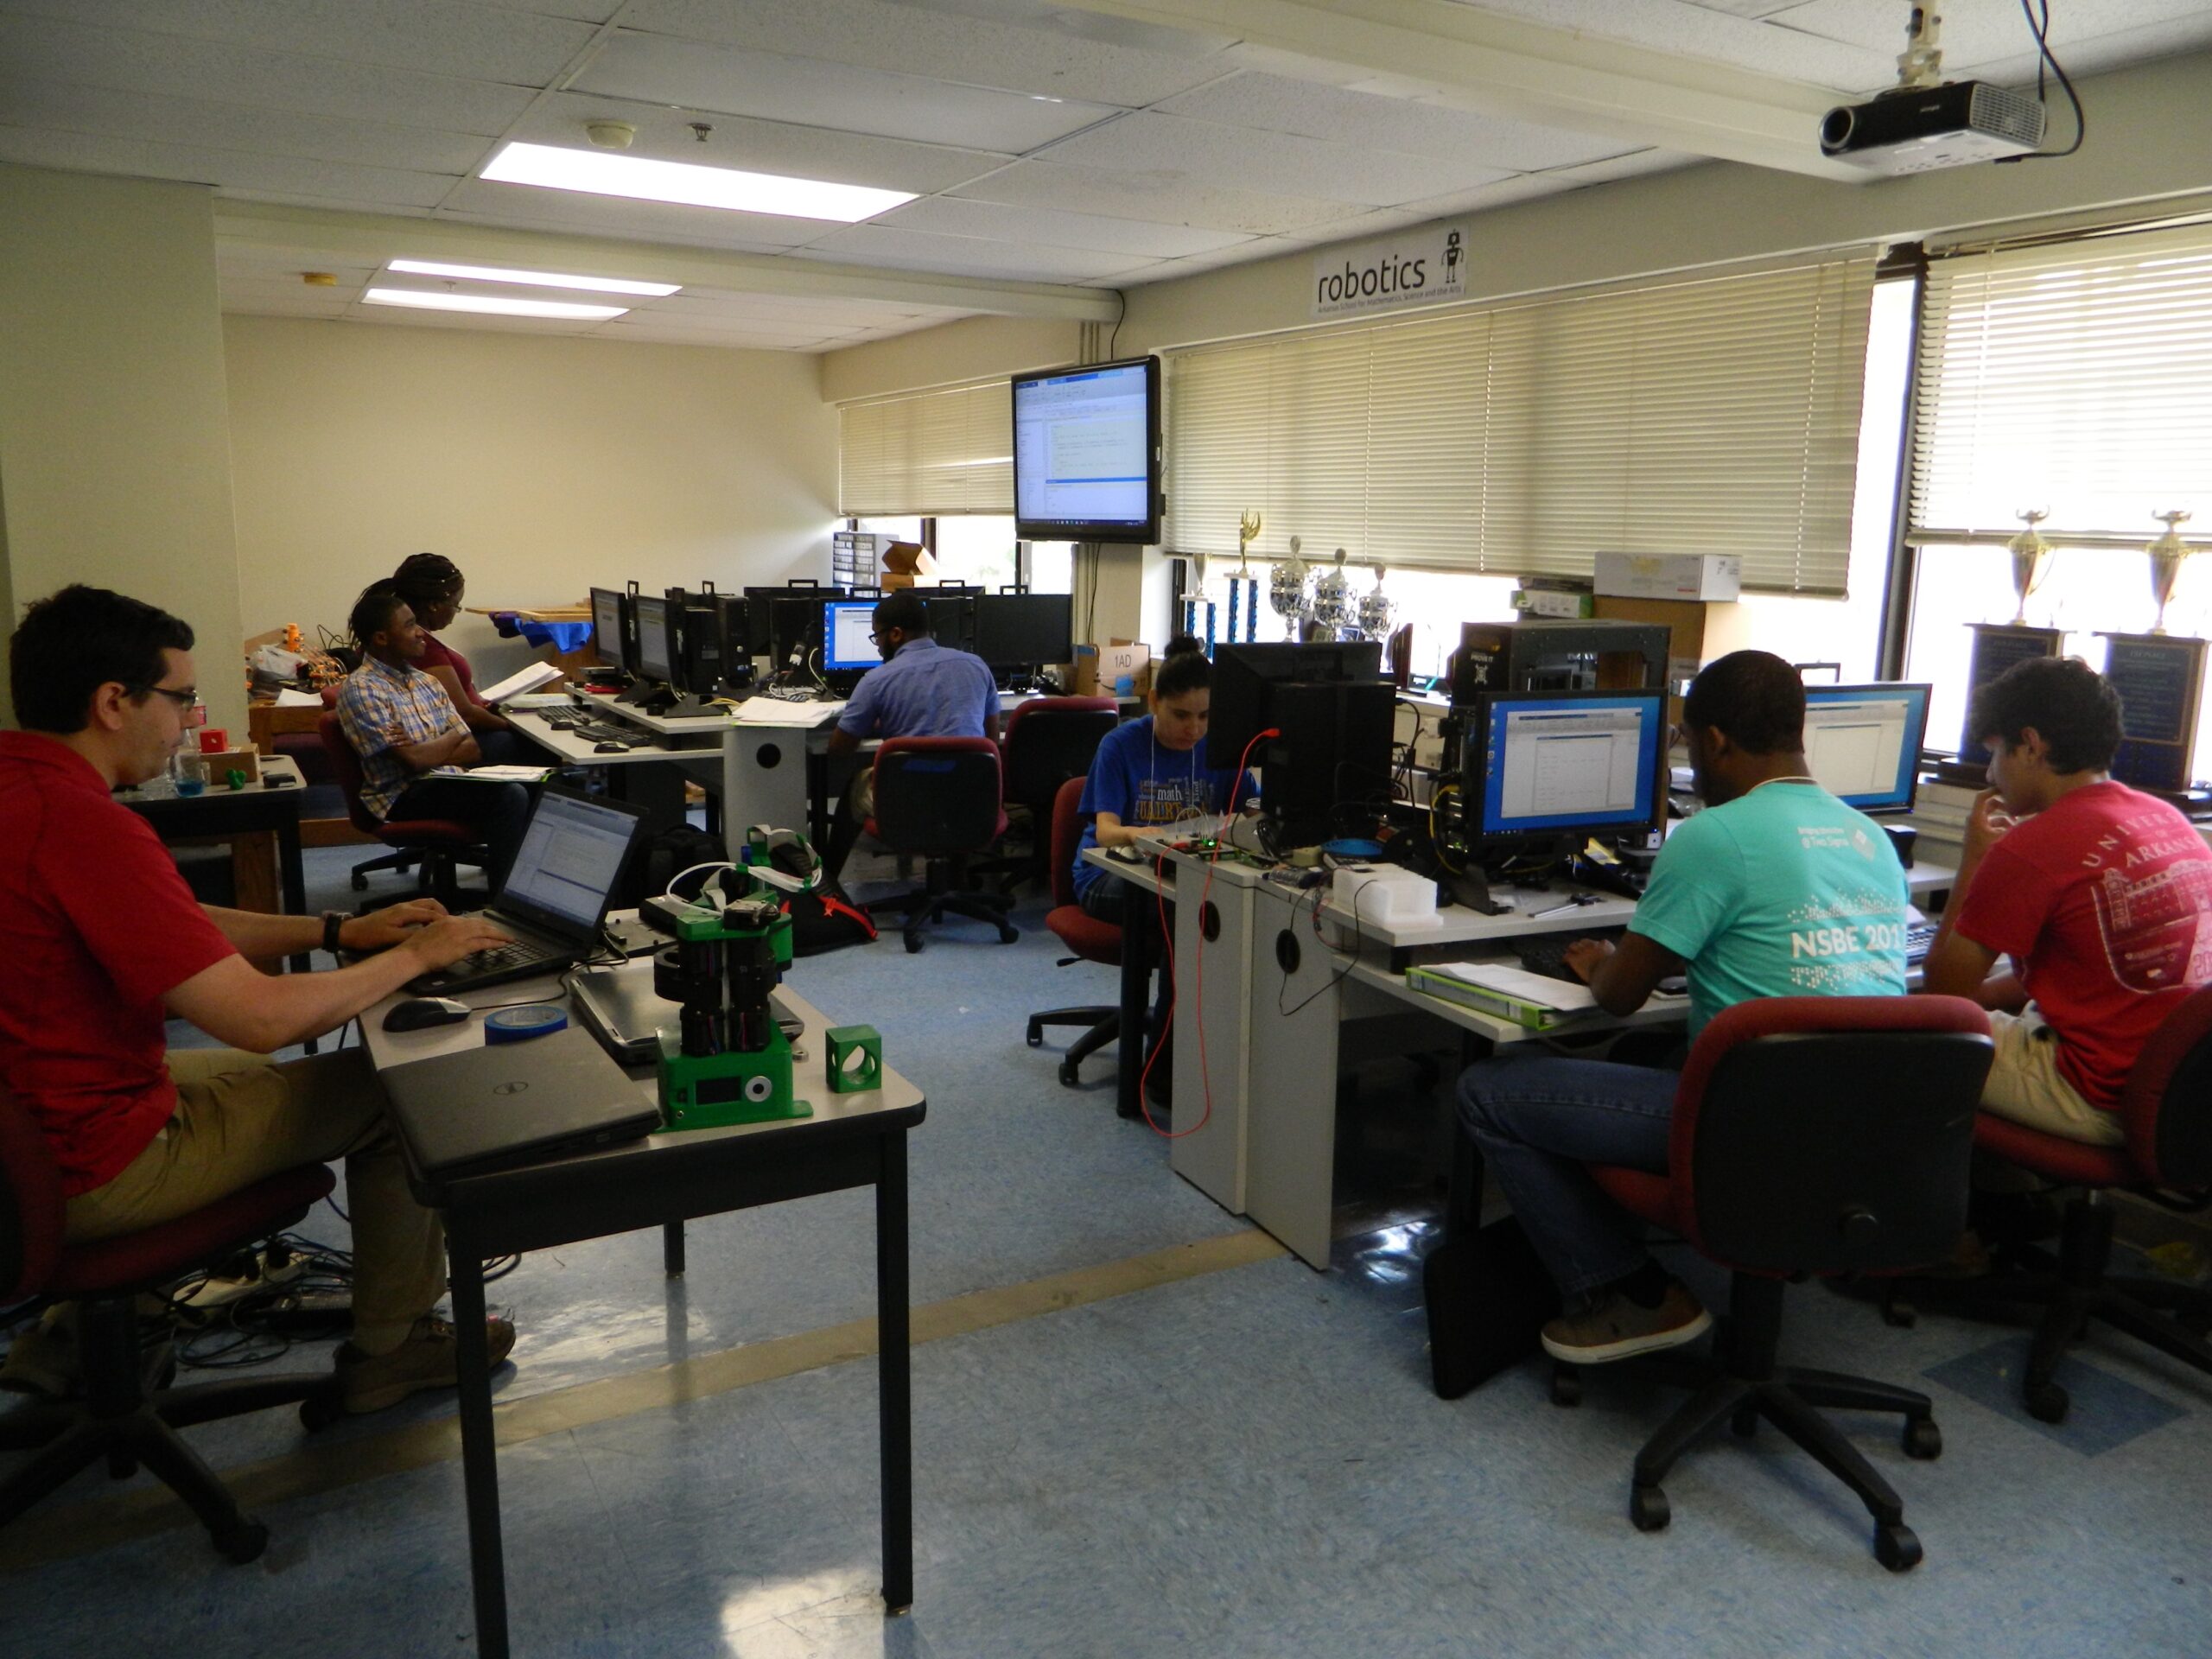 http://Students%20at%20computer%20workstations